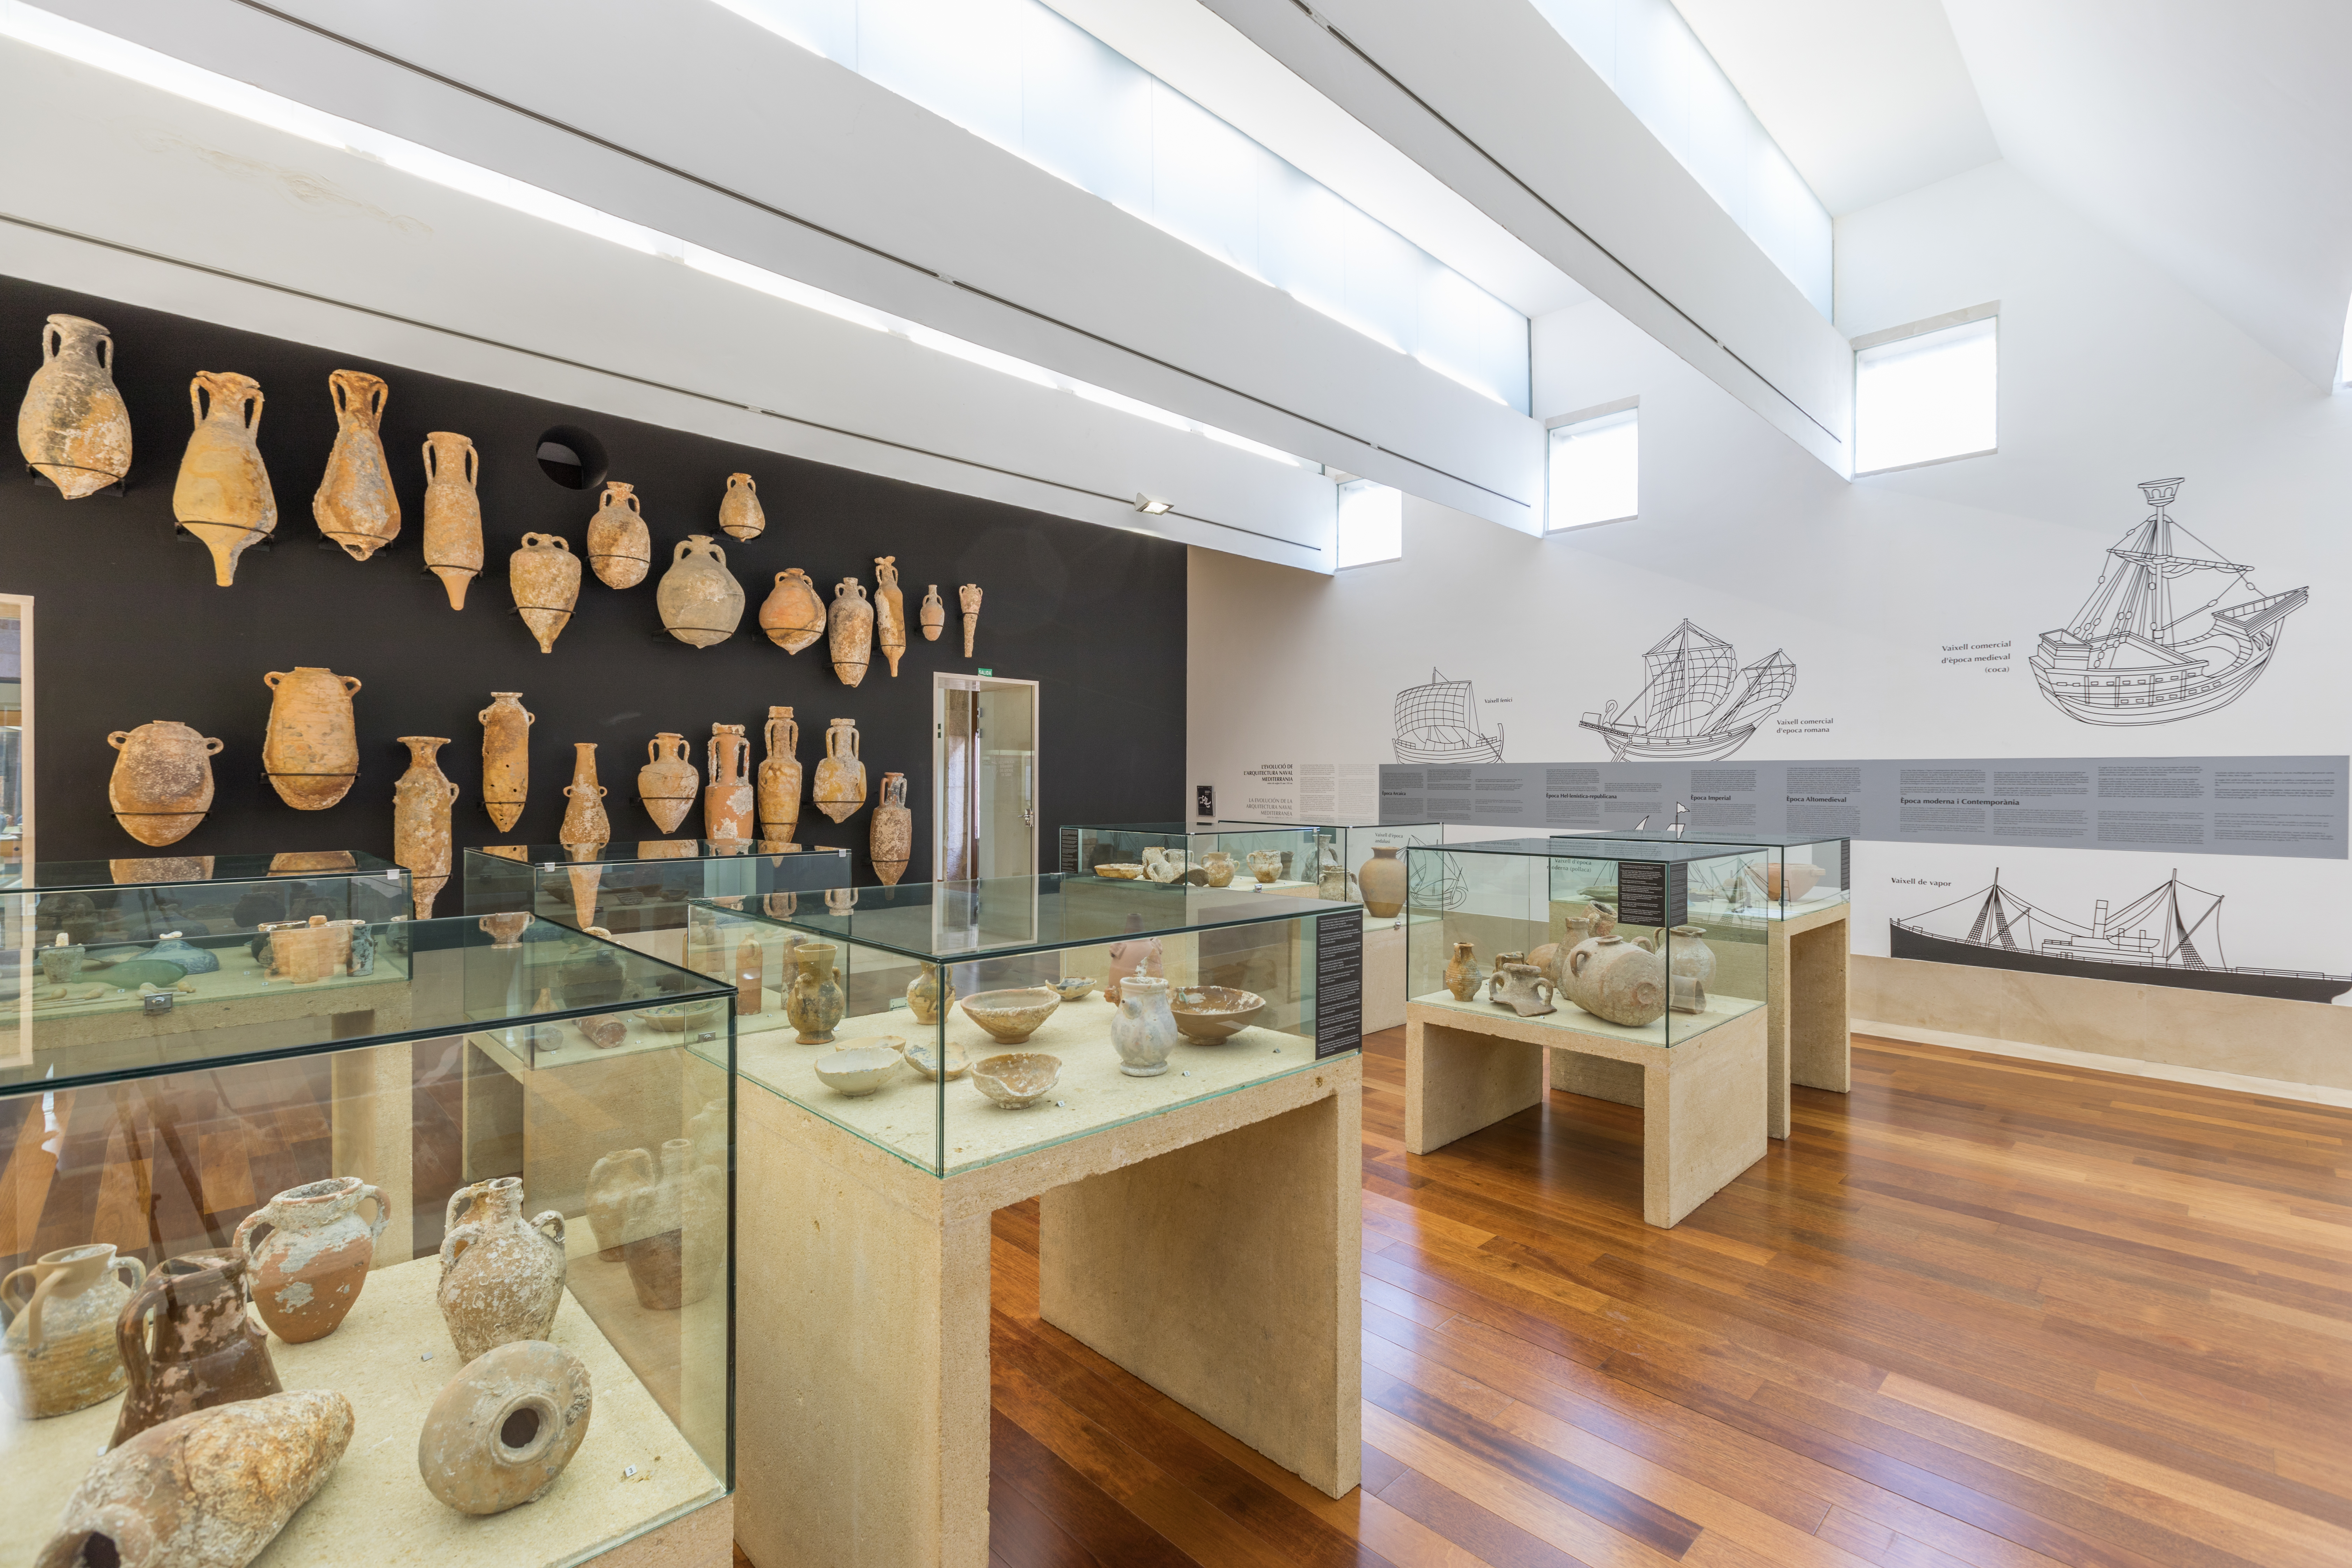 The Soler Blasco Archaeological and Ethnological Museum